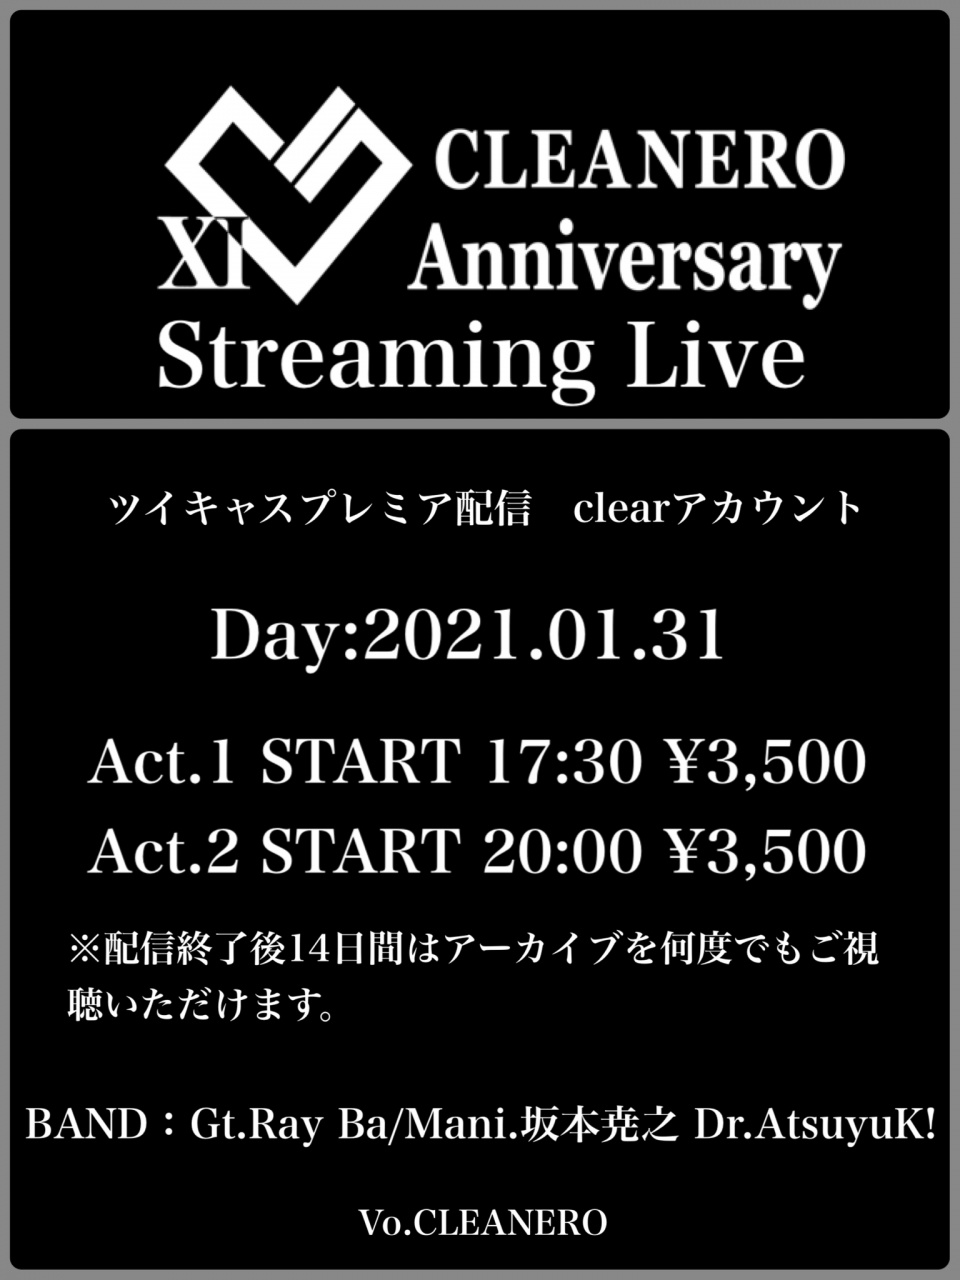 『 CLEANERO 11th Anniversary Streaming Live』